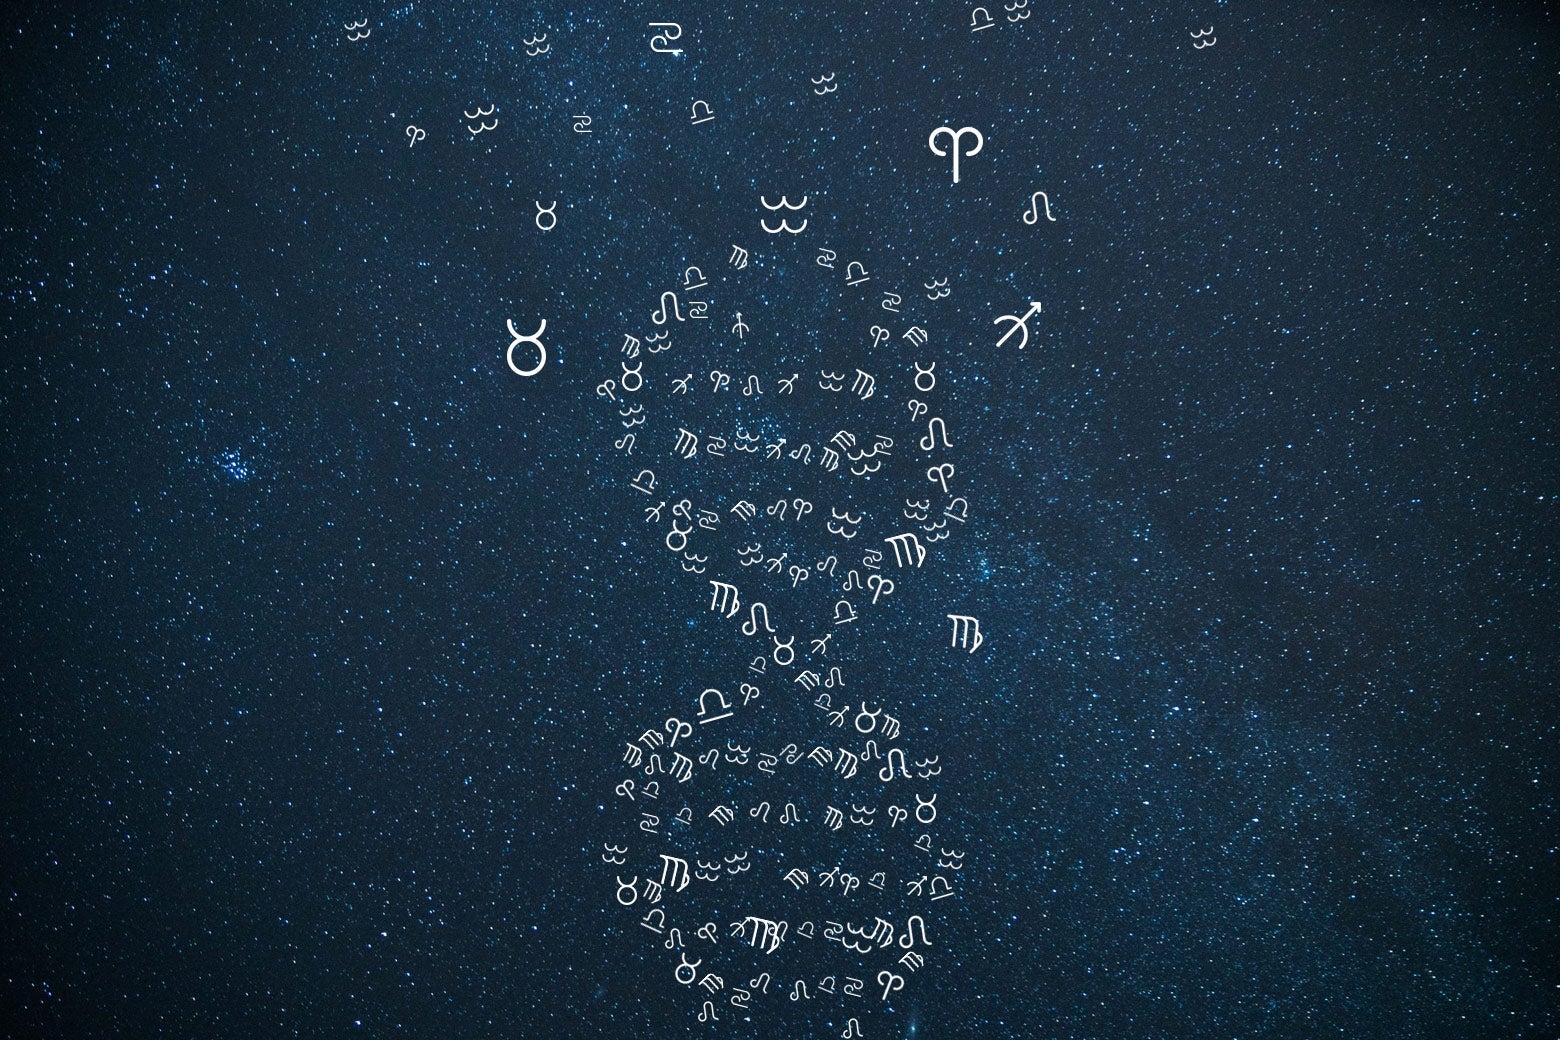 A double helix composed of astrological symbols.